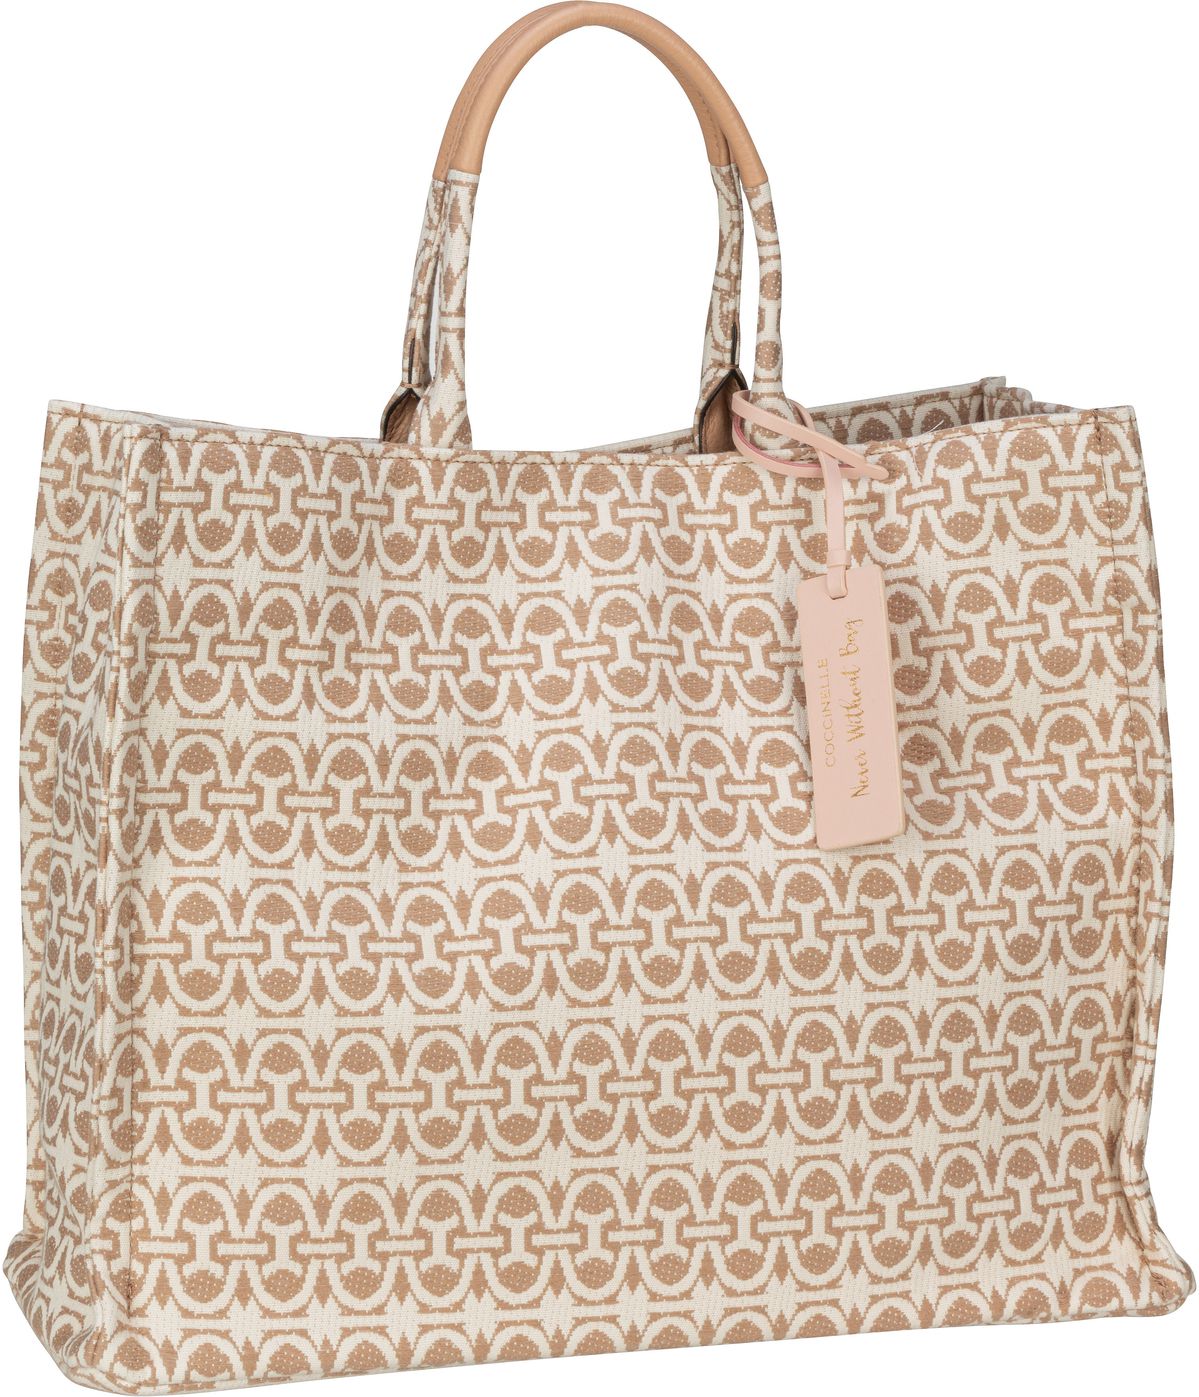 Coccinelle Never Without Bag Jacquard 1801 - Multi Natural/Toasted